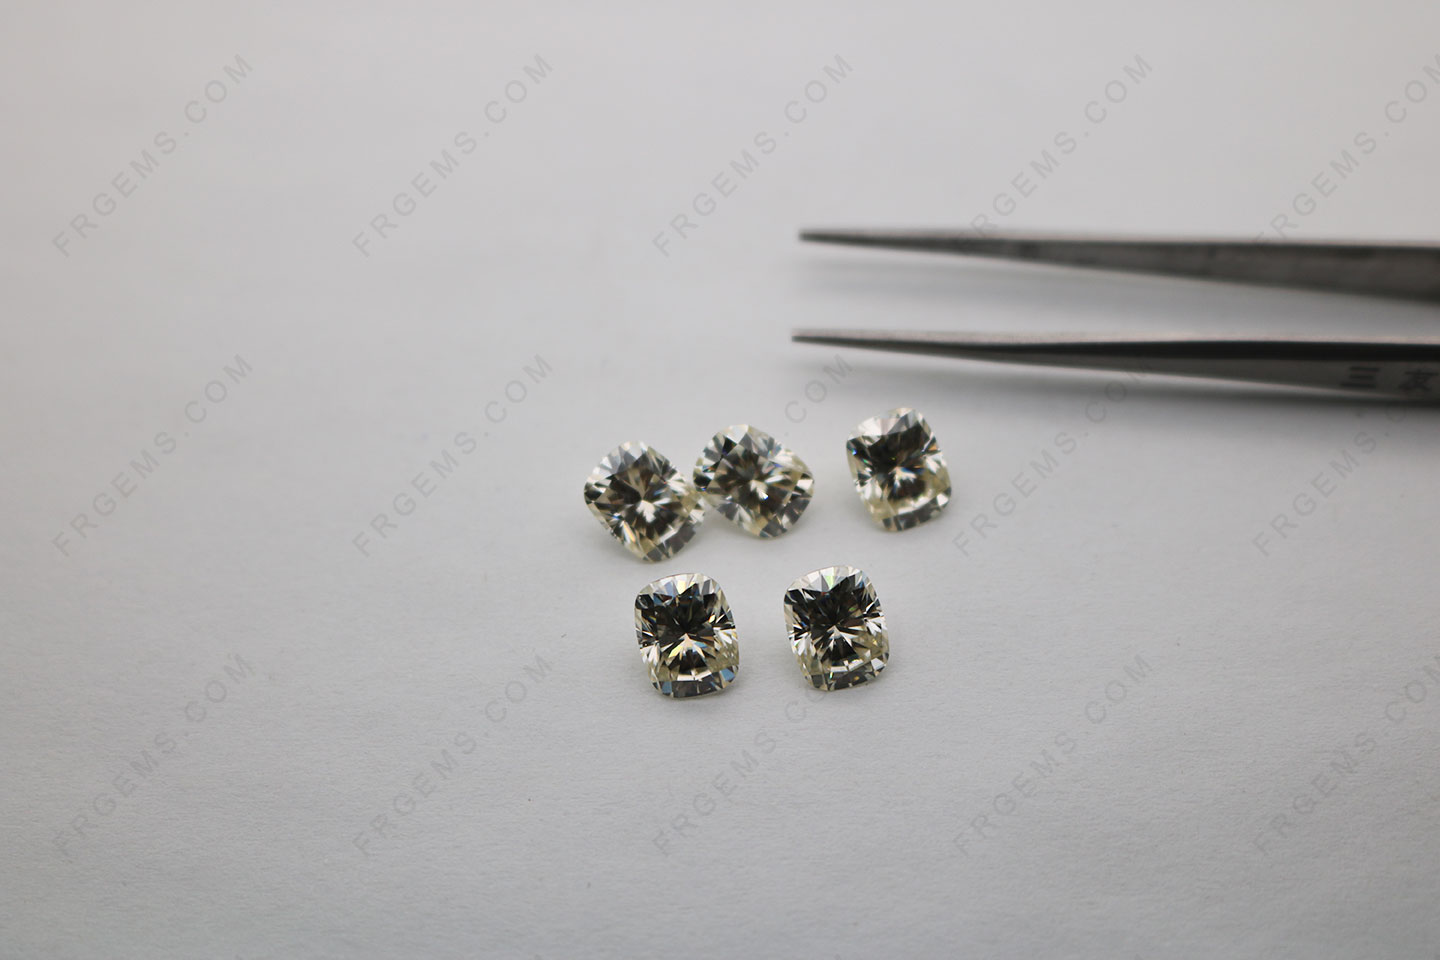 Loose Moissanite Yellow color Elongated cushion faceted Brilliant cut 9x7mm gemstones wholesale